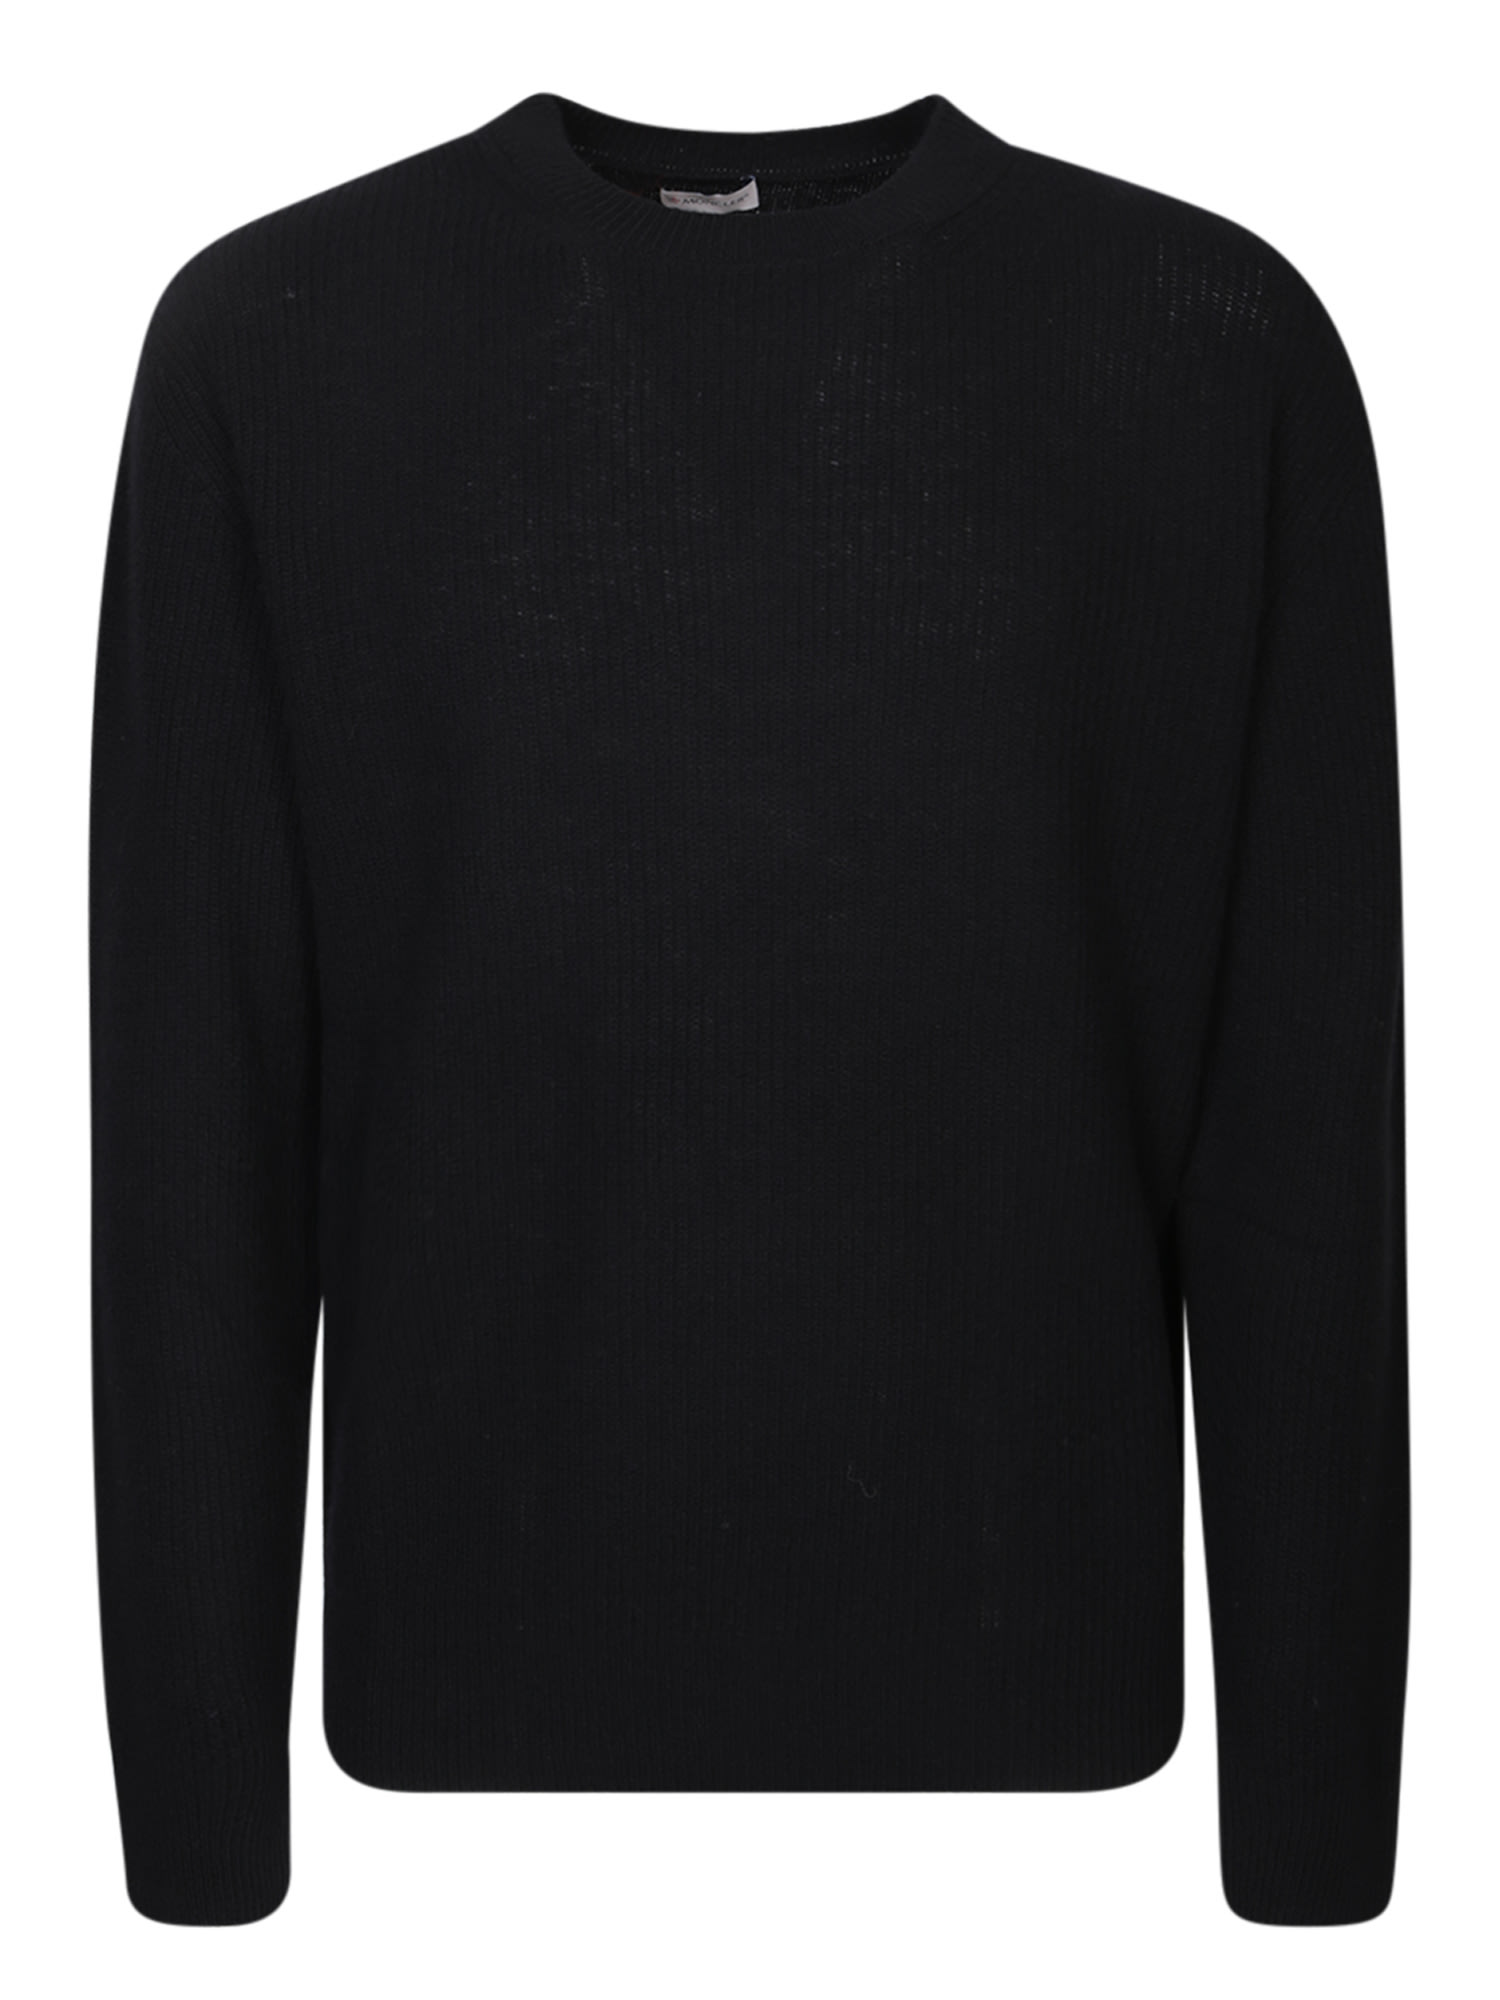 MONCLER WOOL AND CASHMERE BLACK PULLOVER